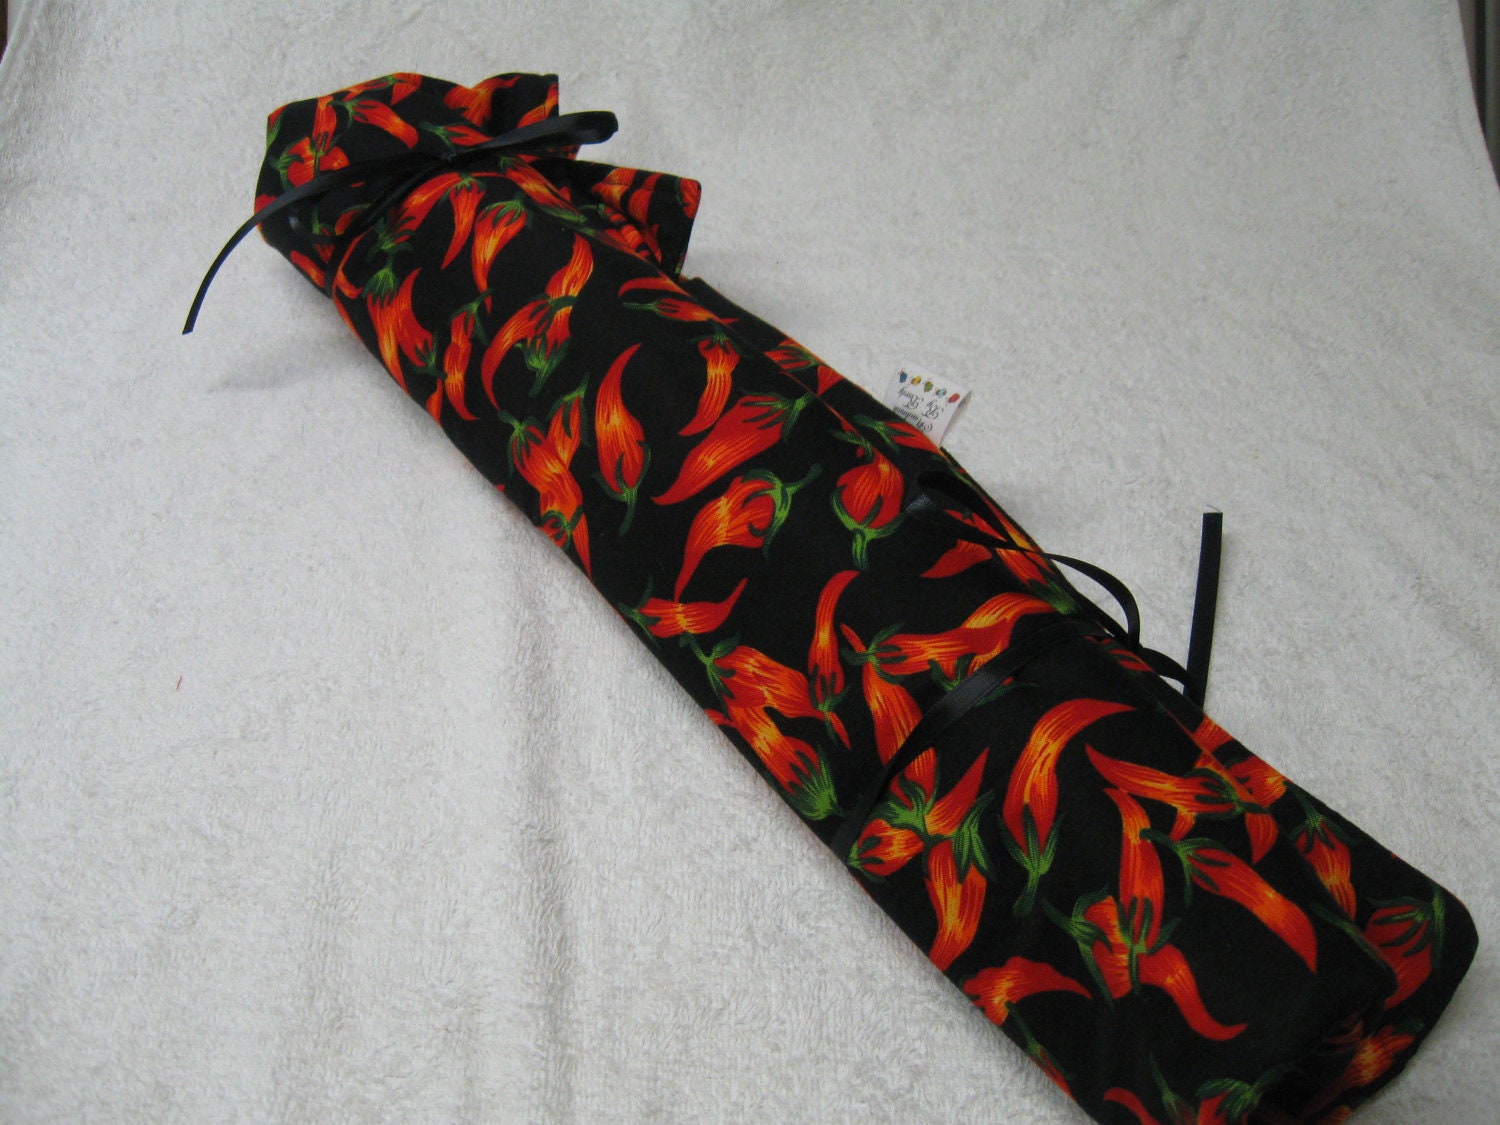 Chefs Knife Organizer Carrier Knife Holder Made of Cotton Heavy Padded Fabric with Four Pockets Red Hot Pepper Print